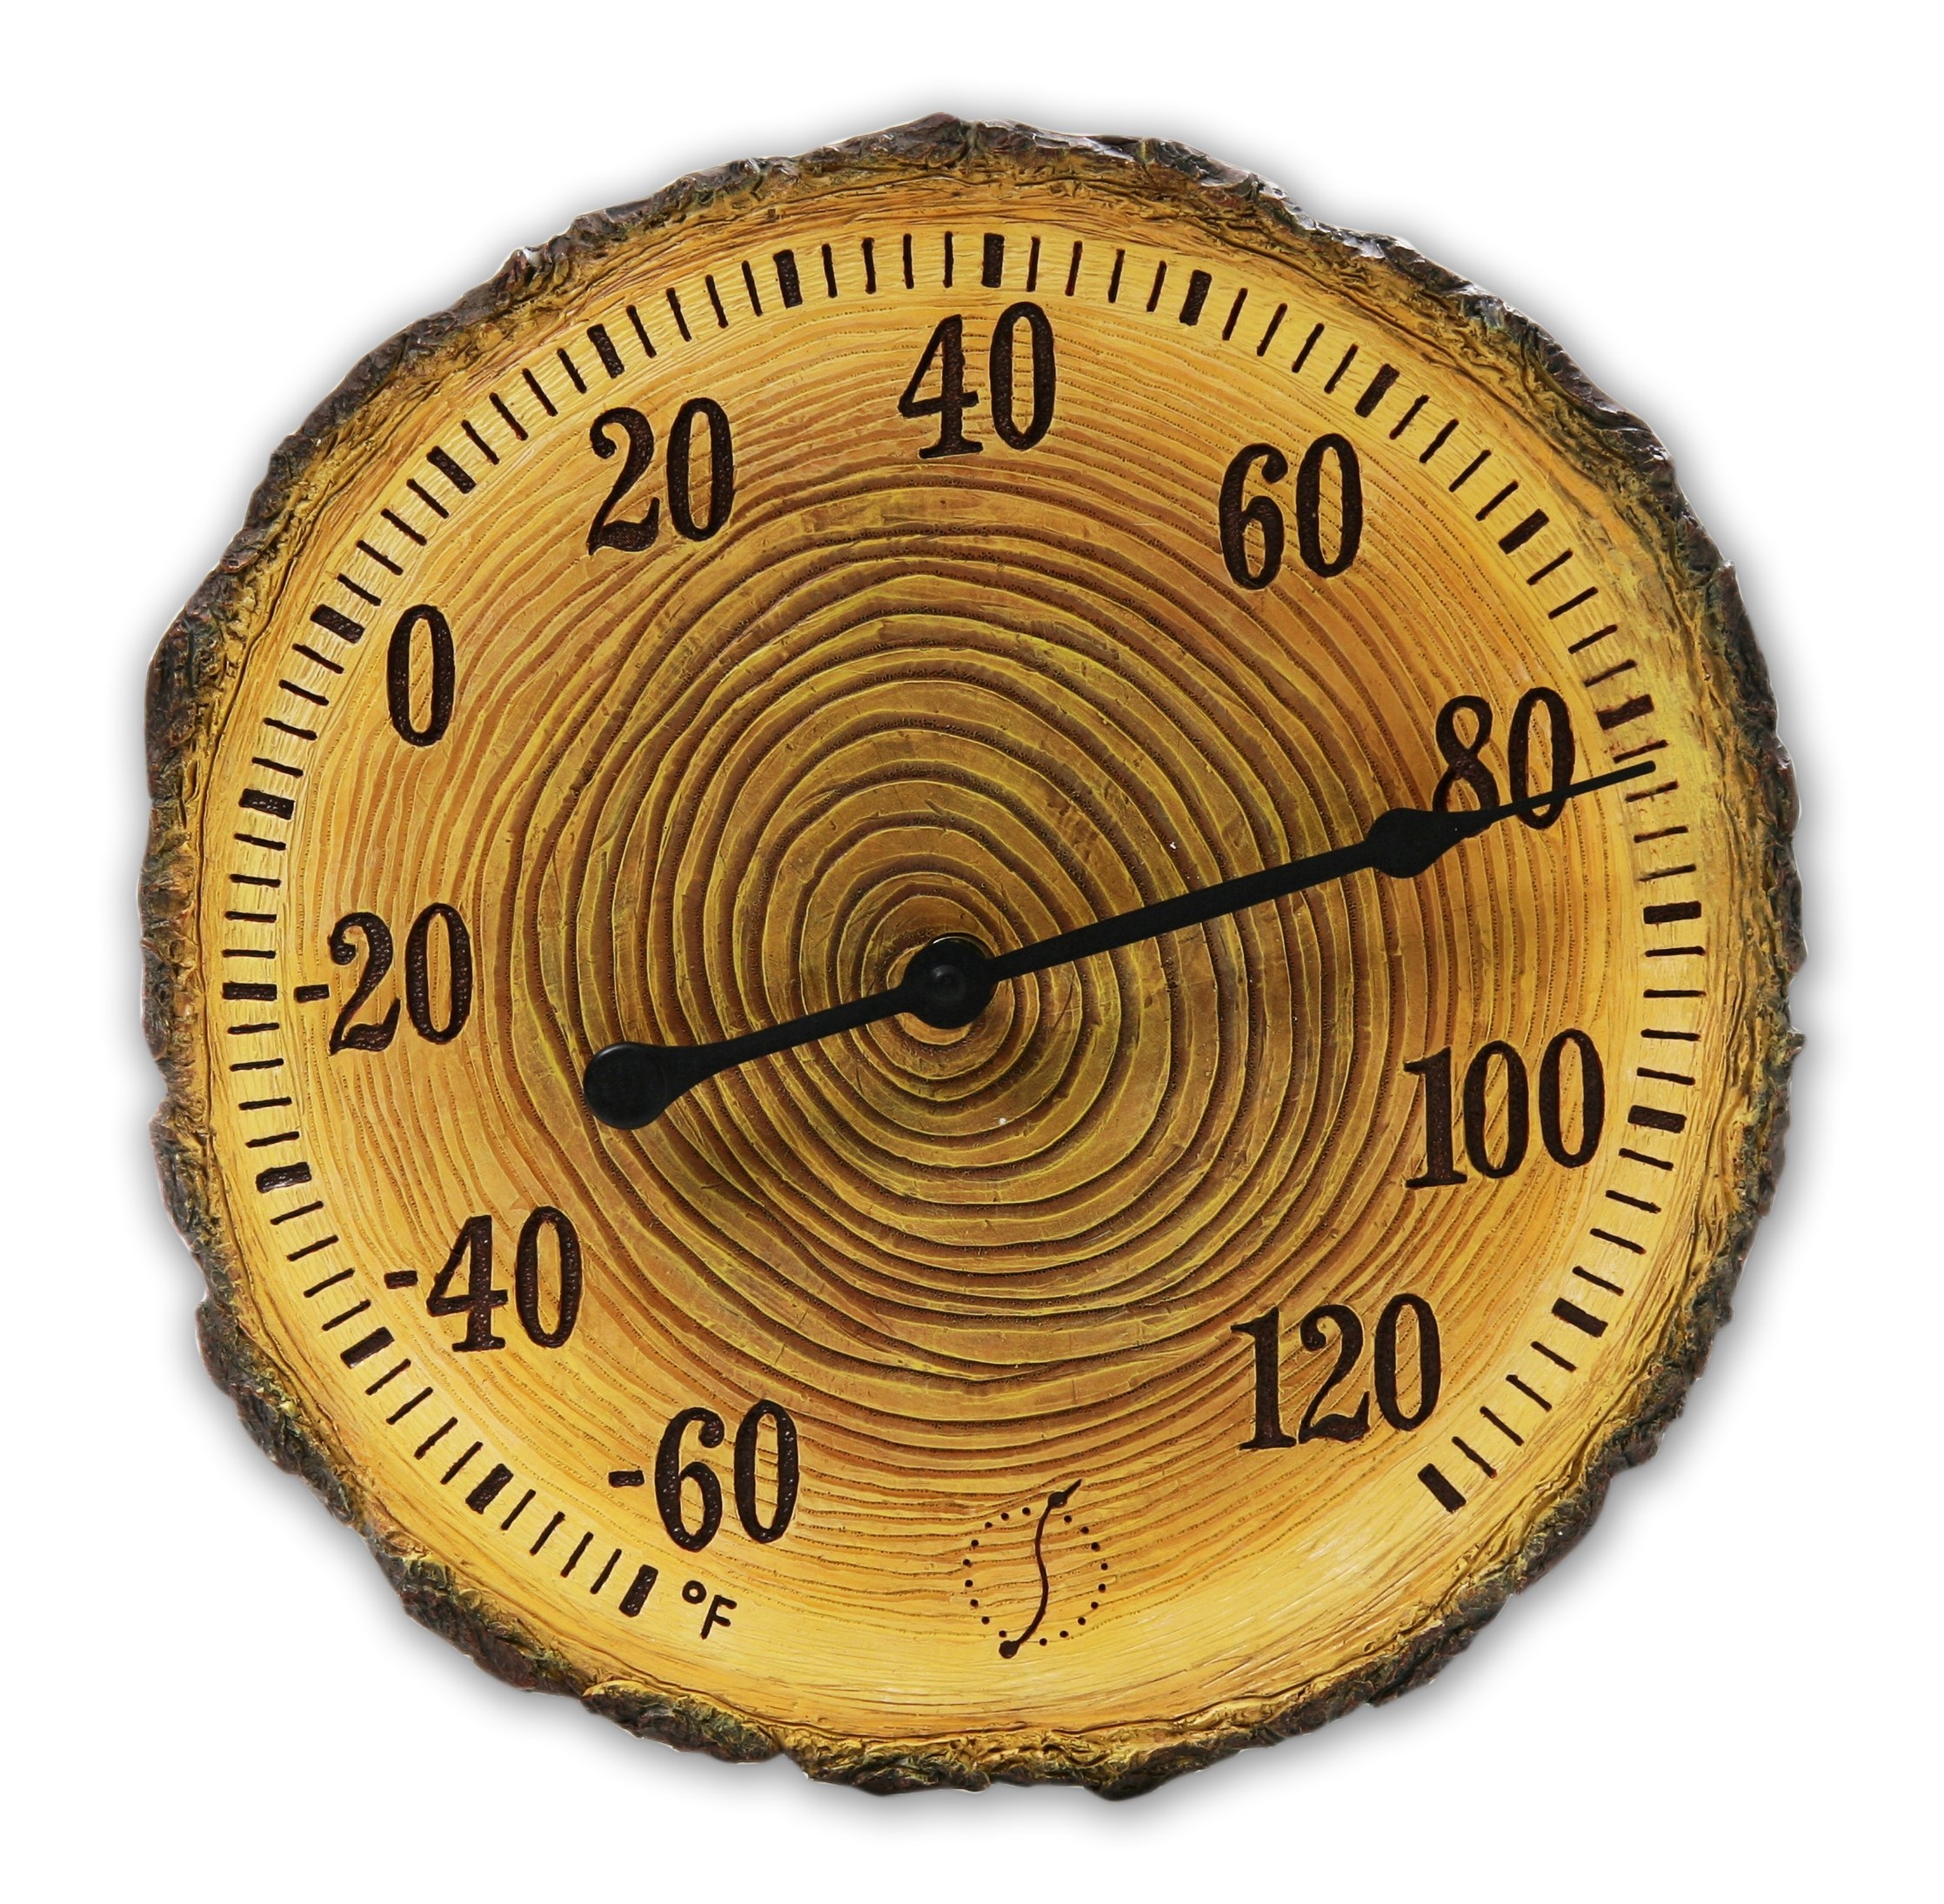 Springfield Precision Instruments Tree Trunk Cross Section Thermometer